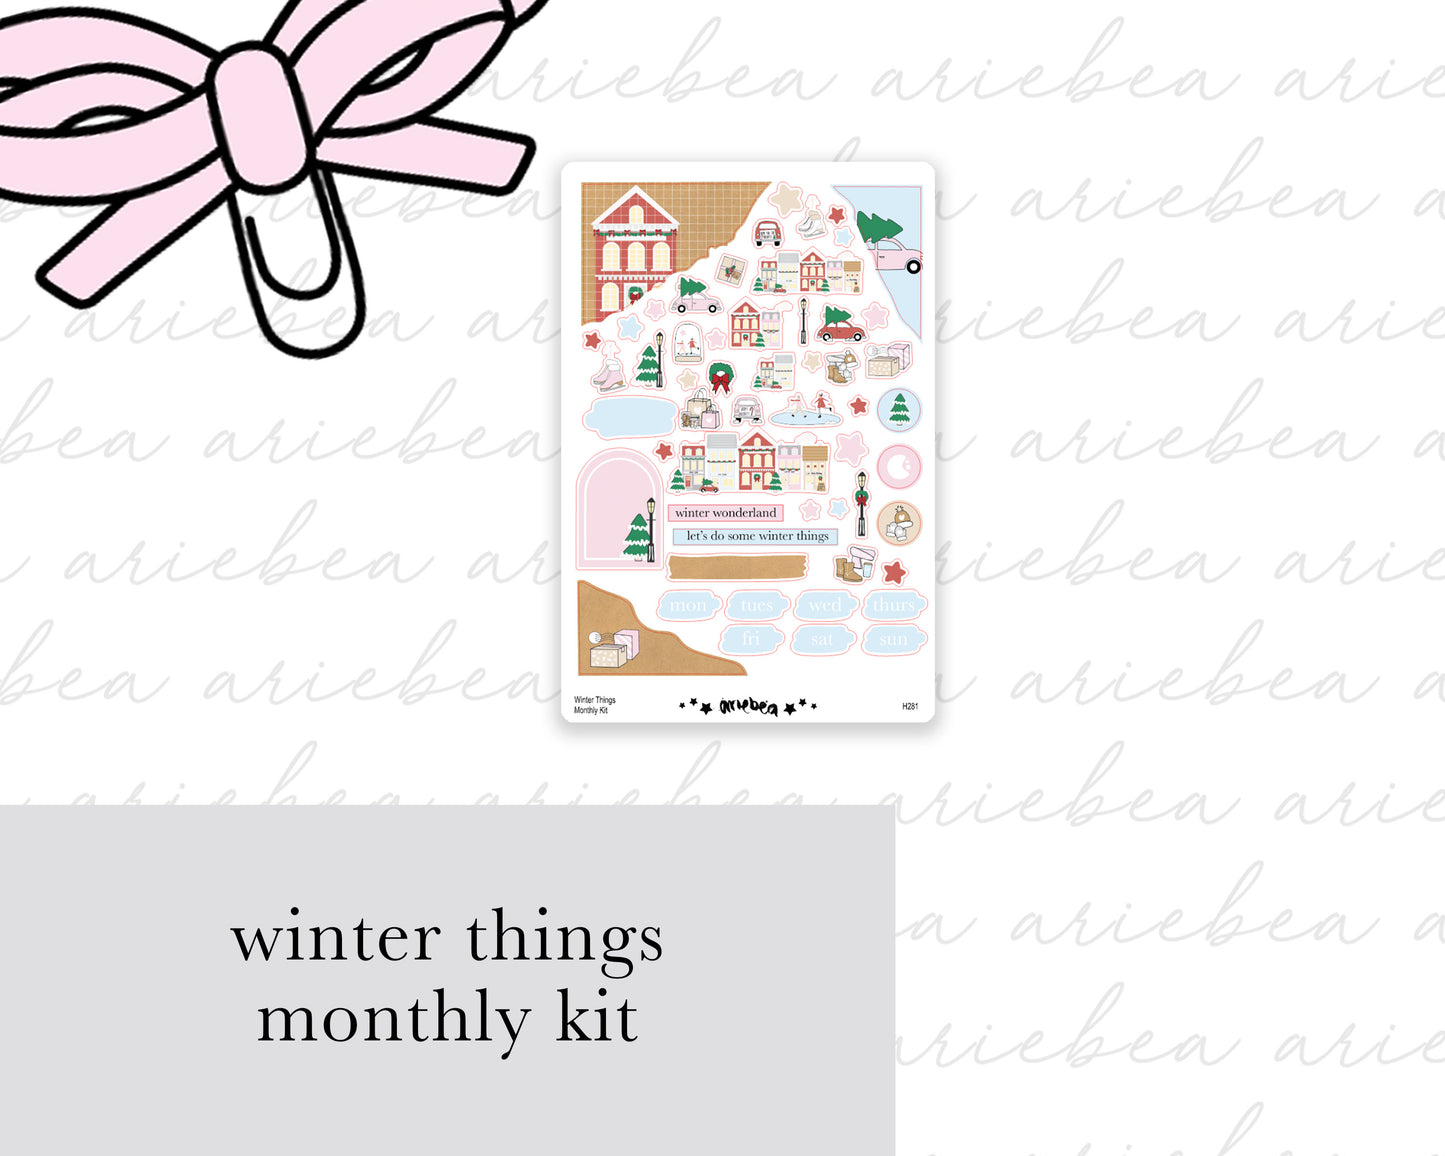 Winter Things Collection Monthly Kit